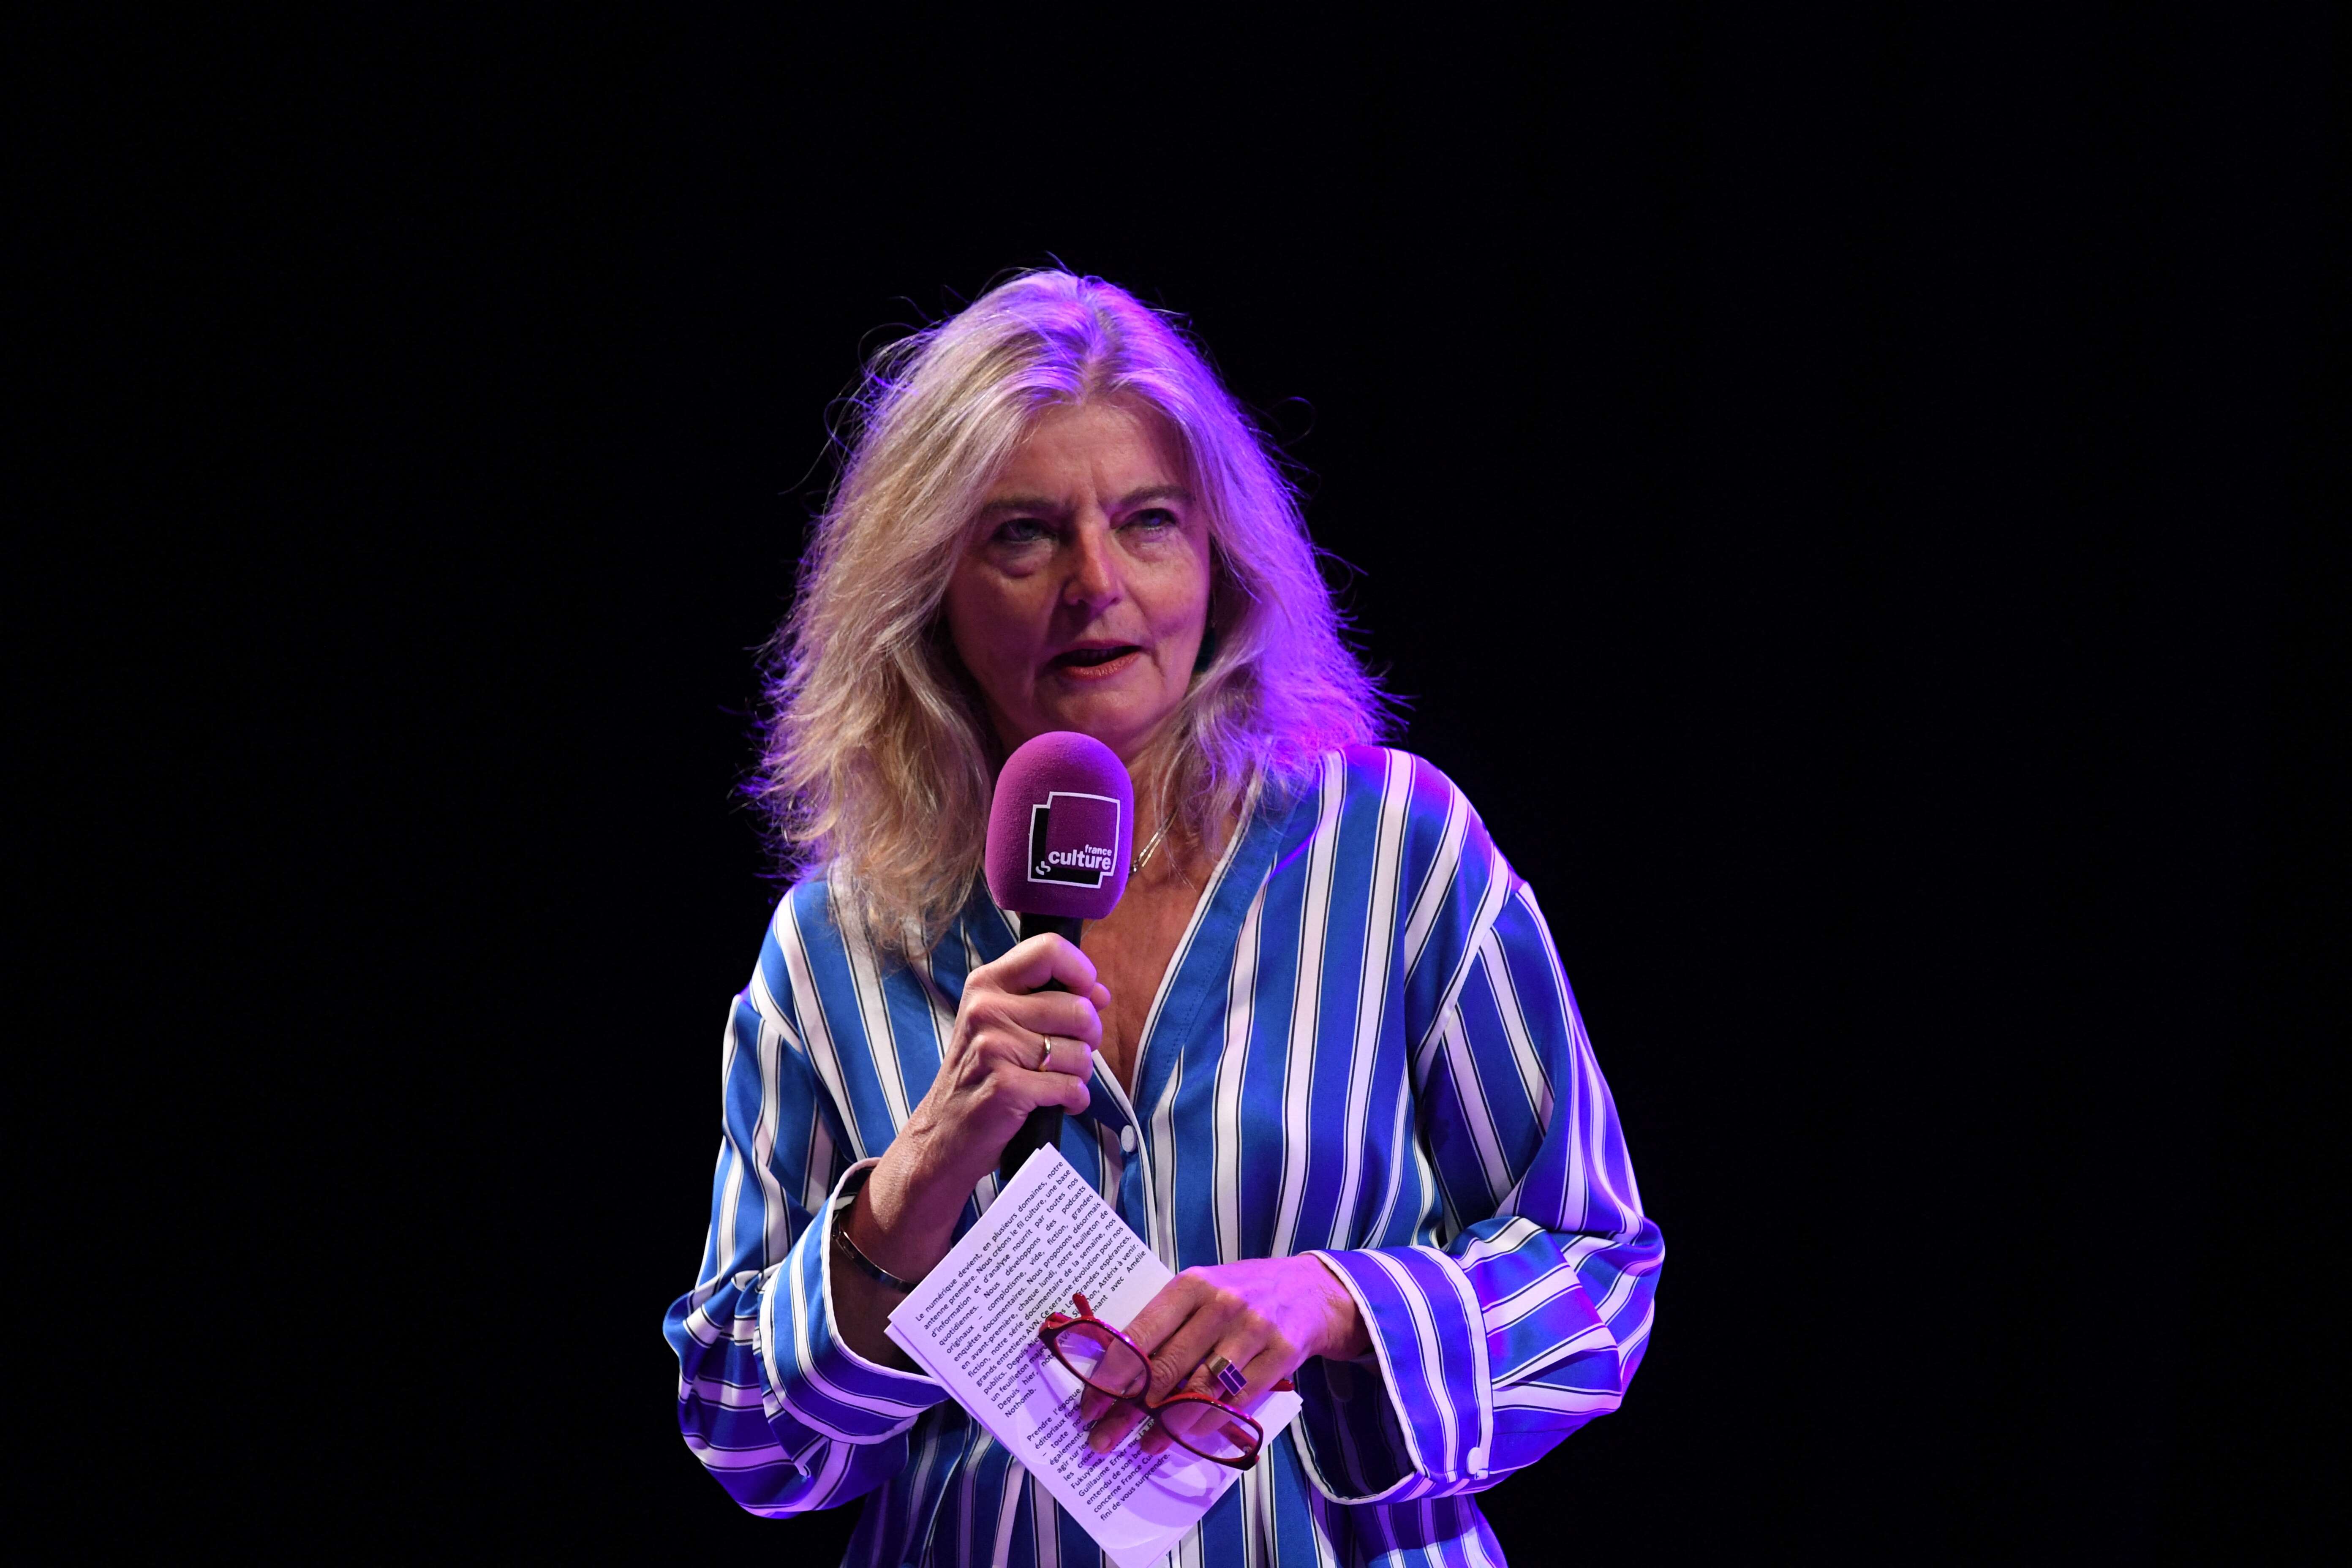 France Culture director Sandrine Treiner holds a press conference in Paris, on August 27, 2019, to present the radio programs for the upcoming season. (Photo by Martin BUREAU / AFP)